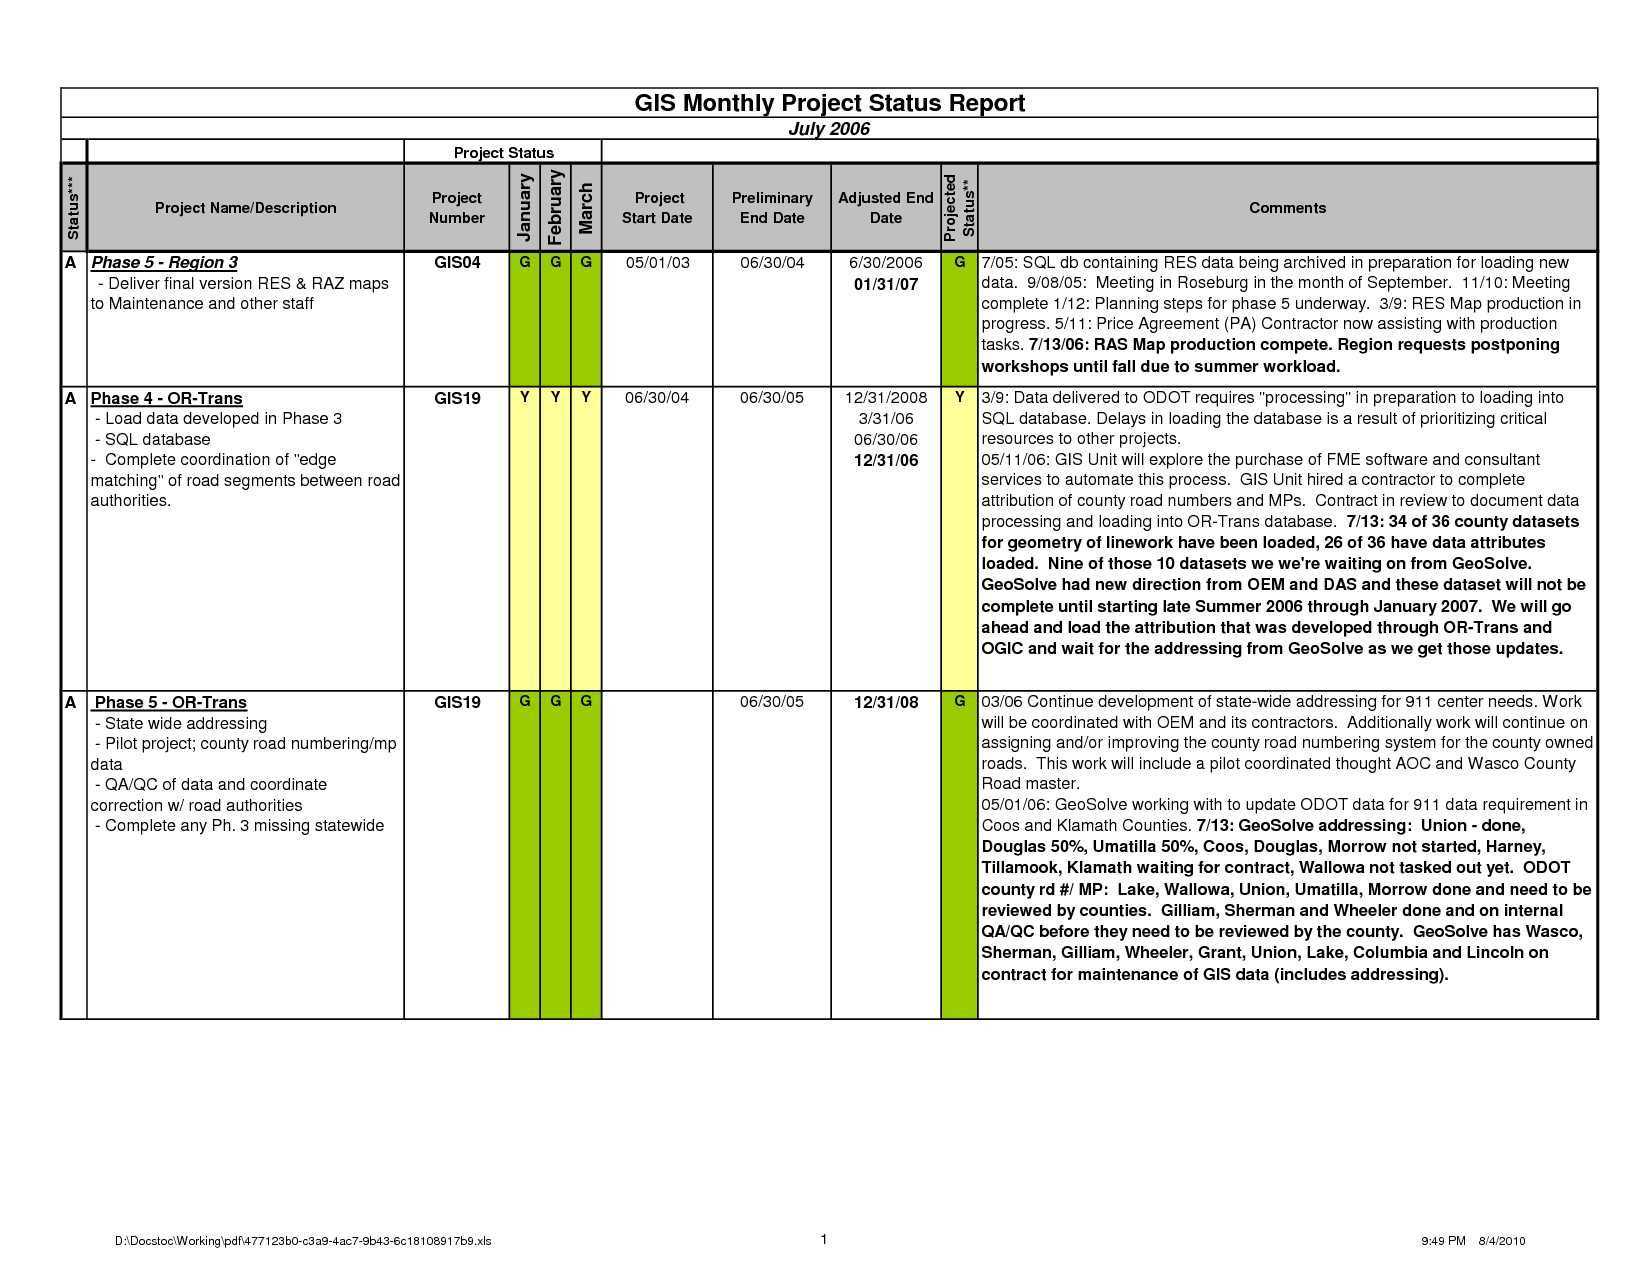 001 Status Report Template Excel Frightening Ideas Work Intended For Daily Project Status Report Template